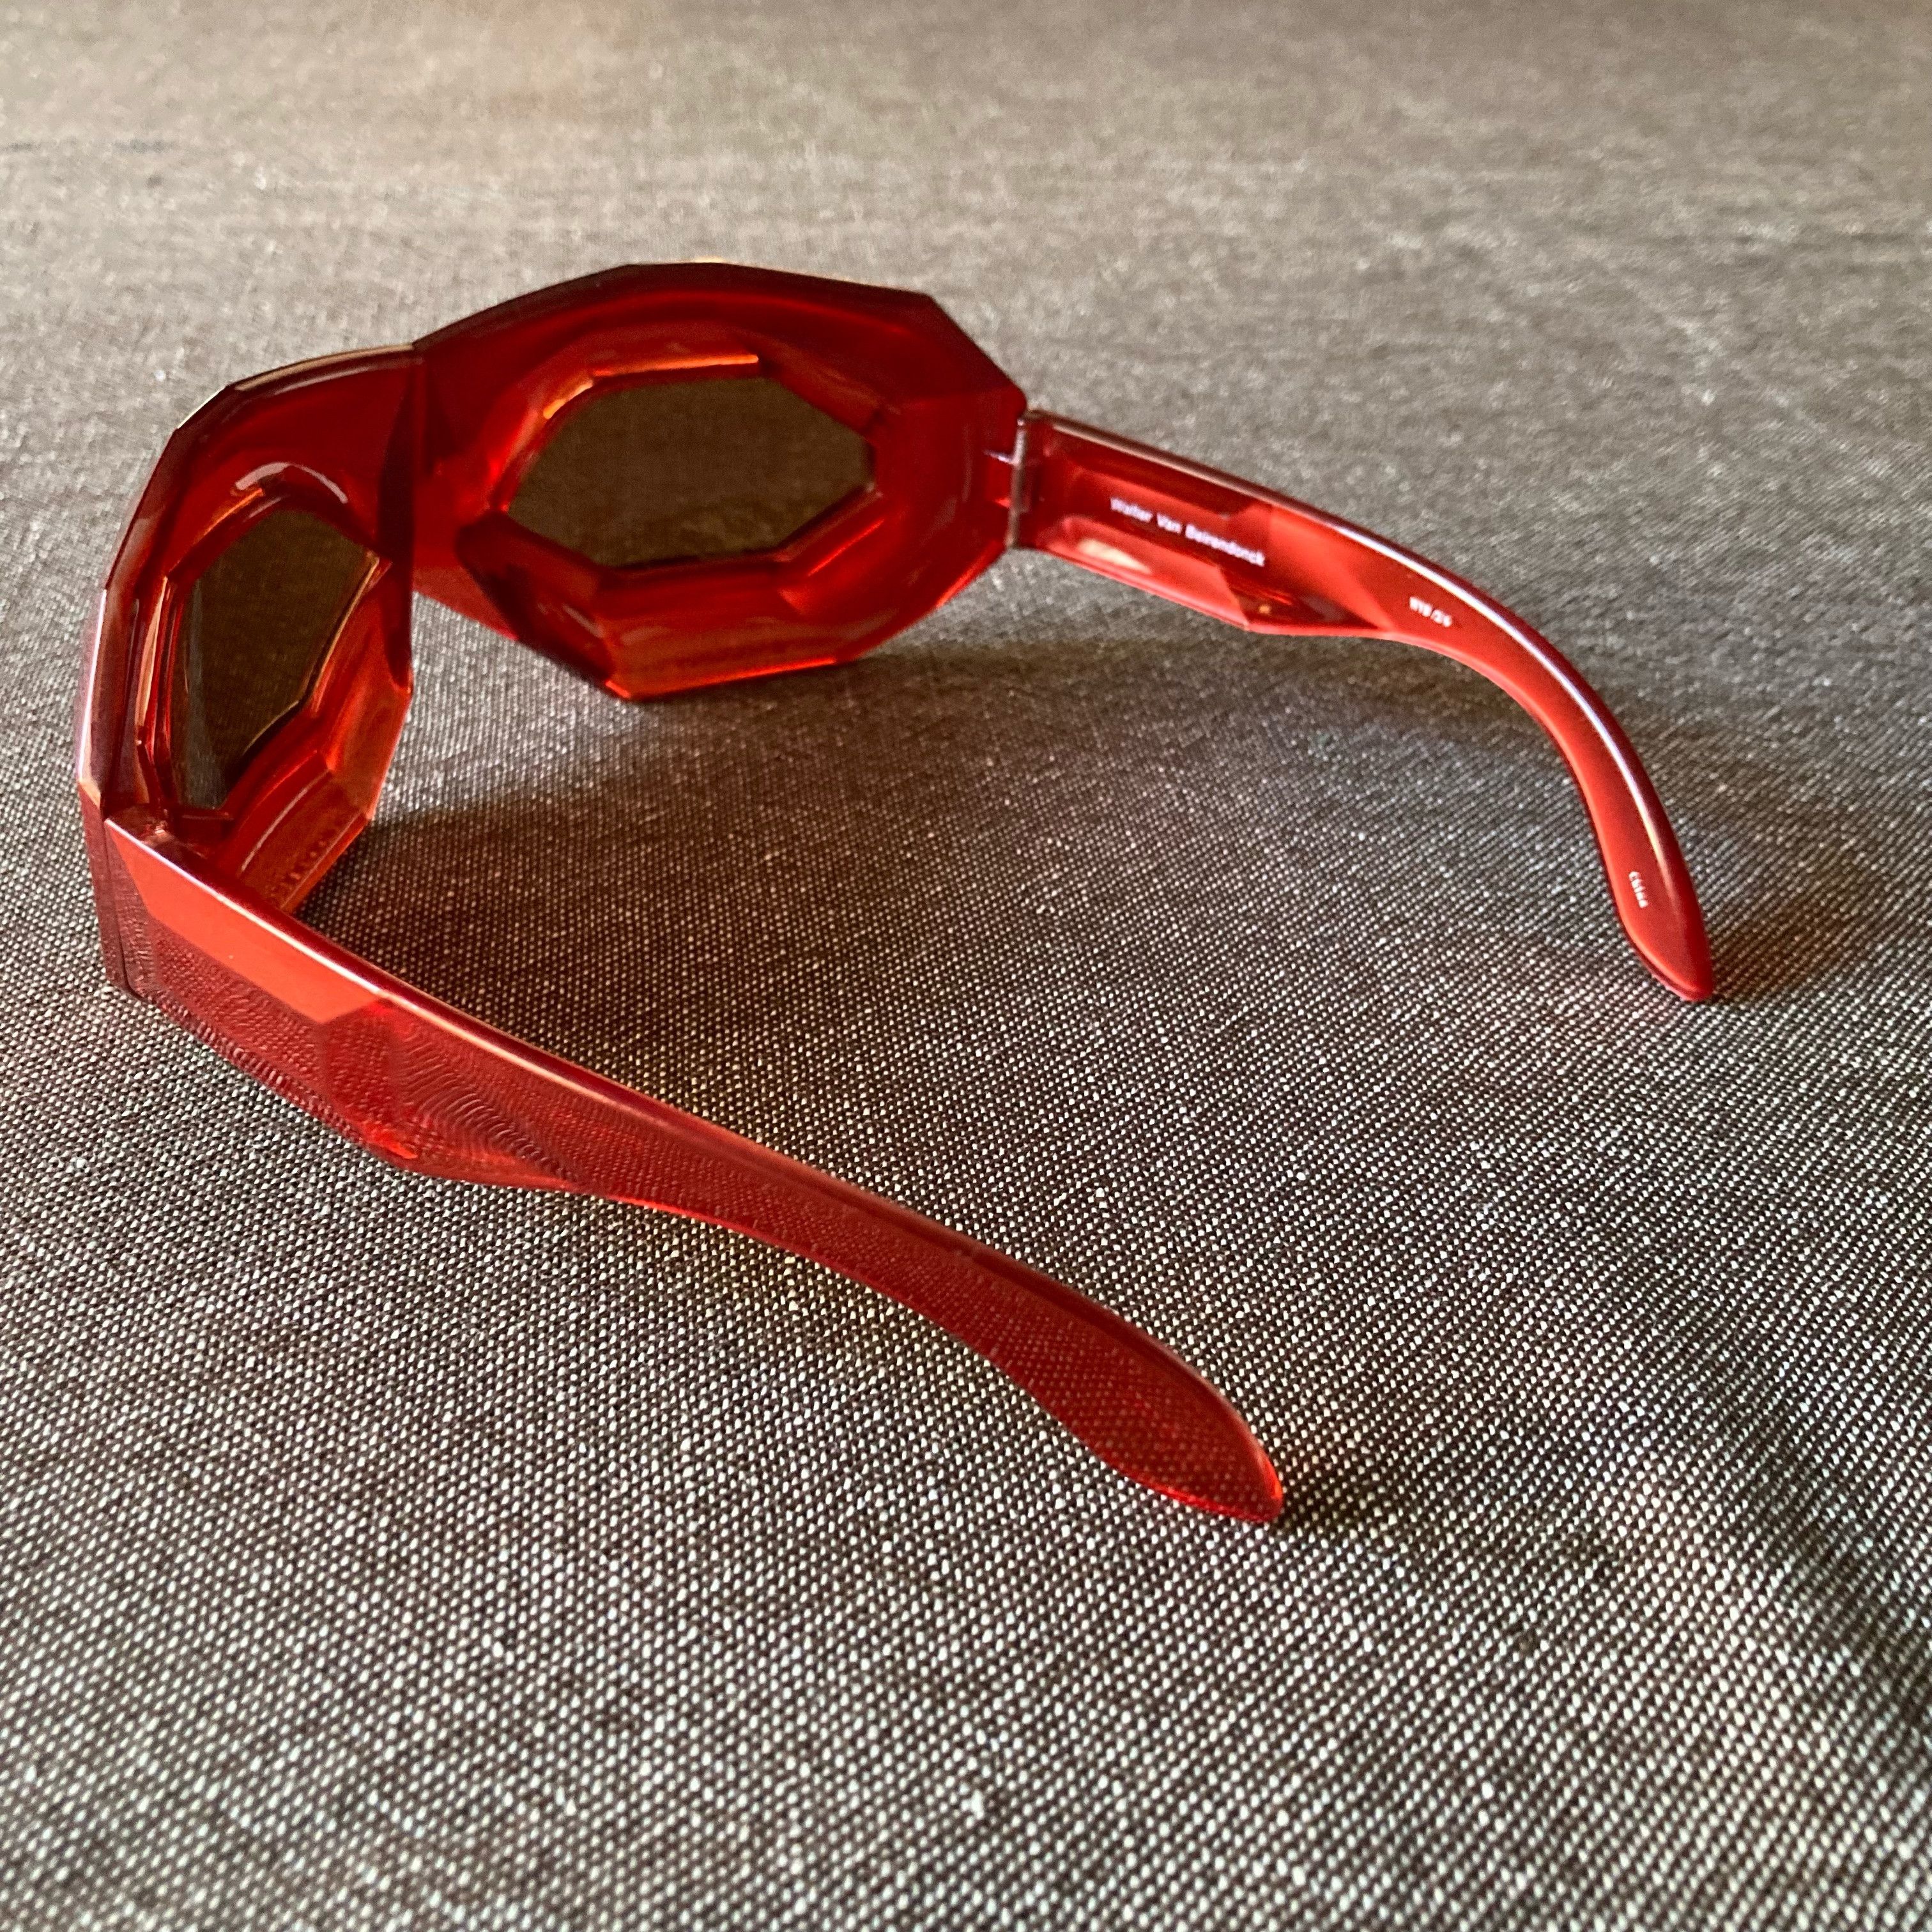 Walter Van Beirendonck Walter Van Beirendonck Red Diamond Sunglasses Size ONE SIZE - 4 Preview